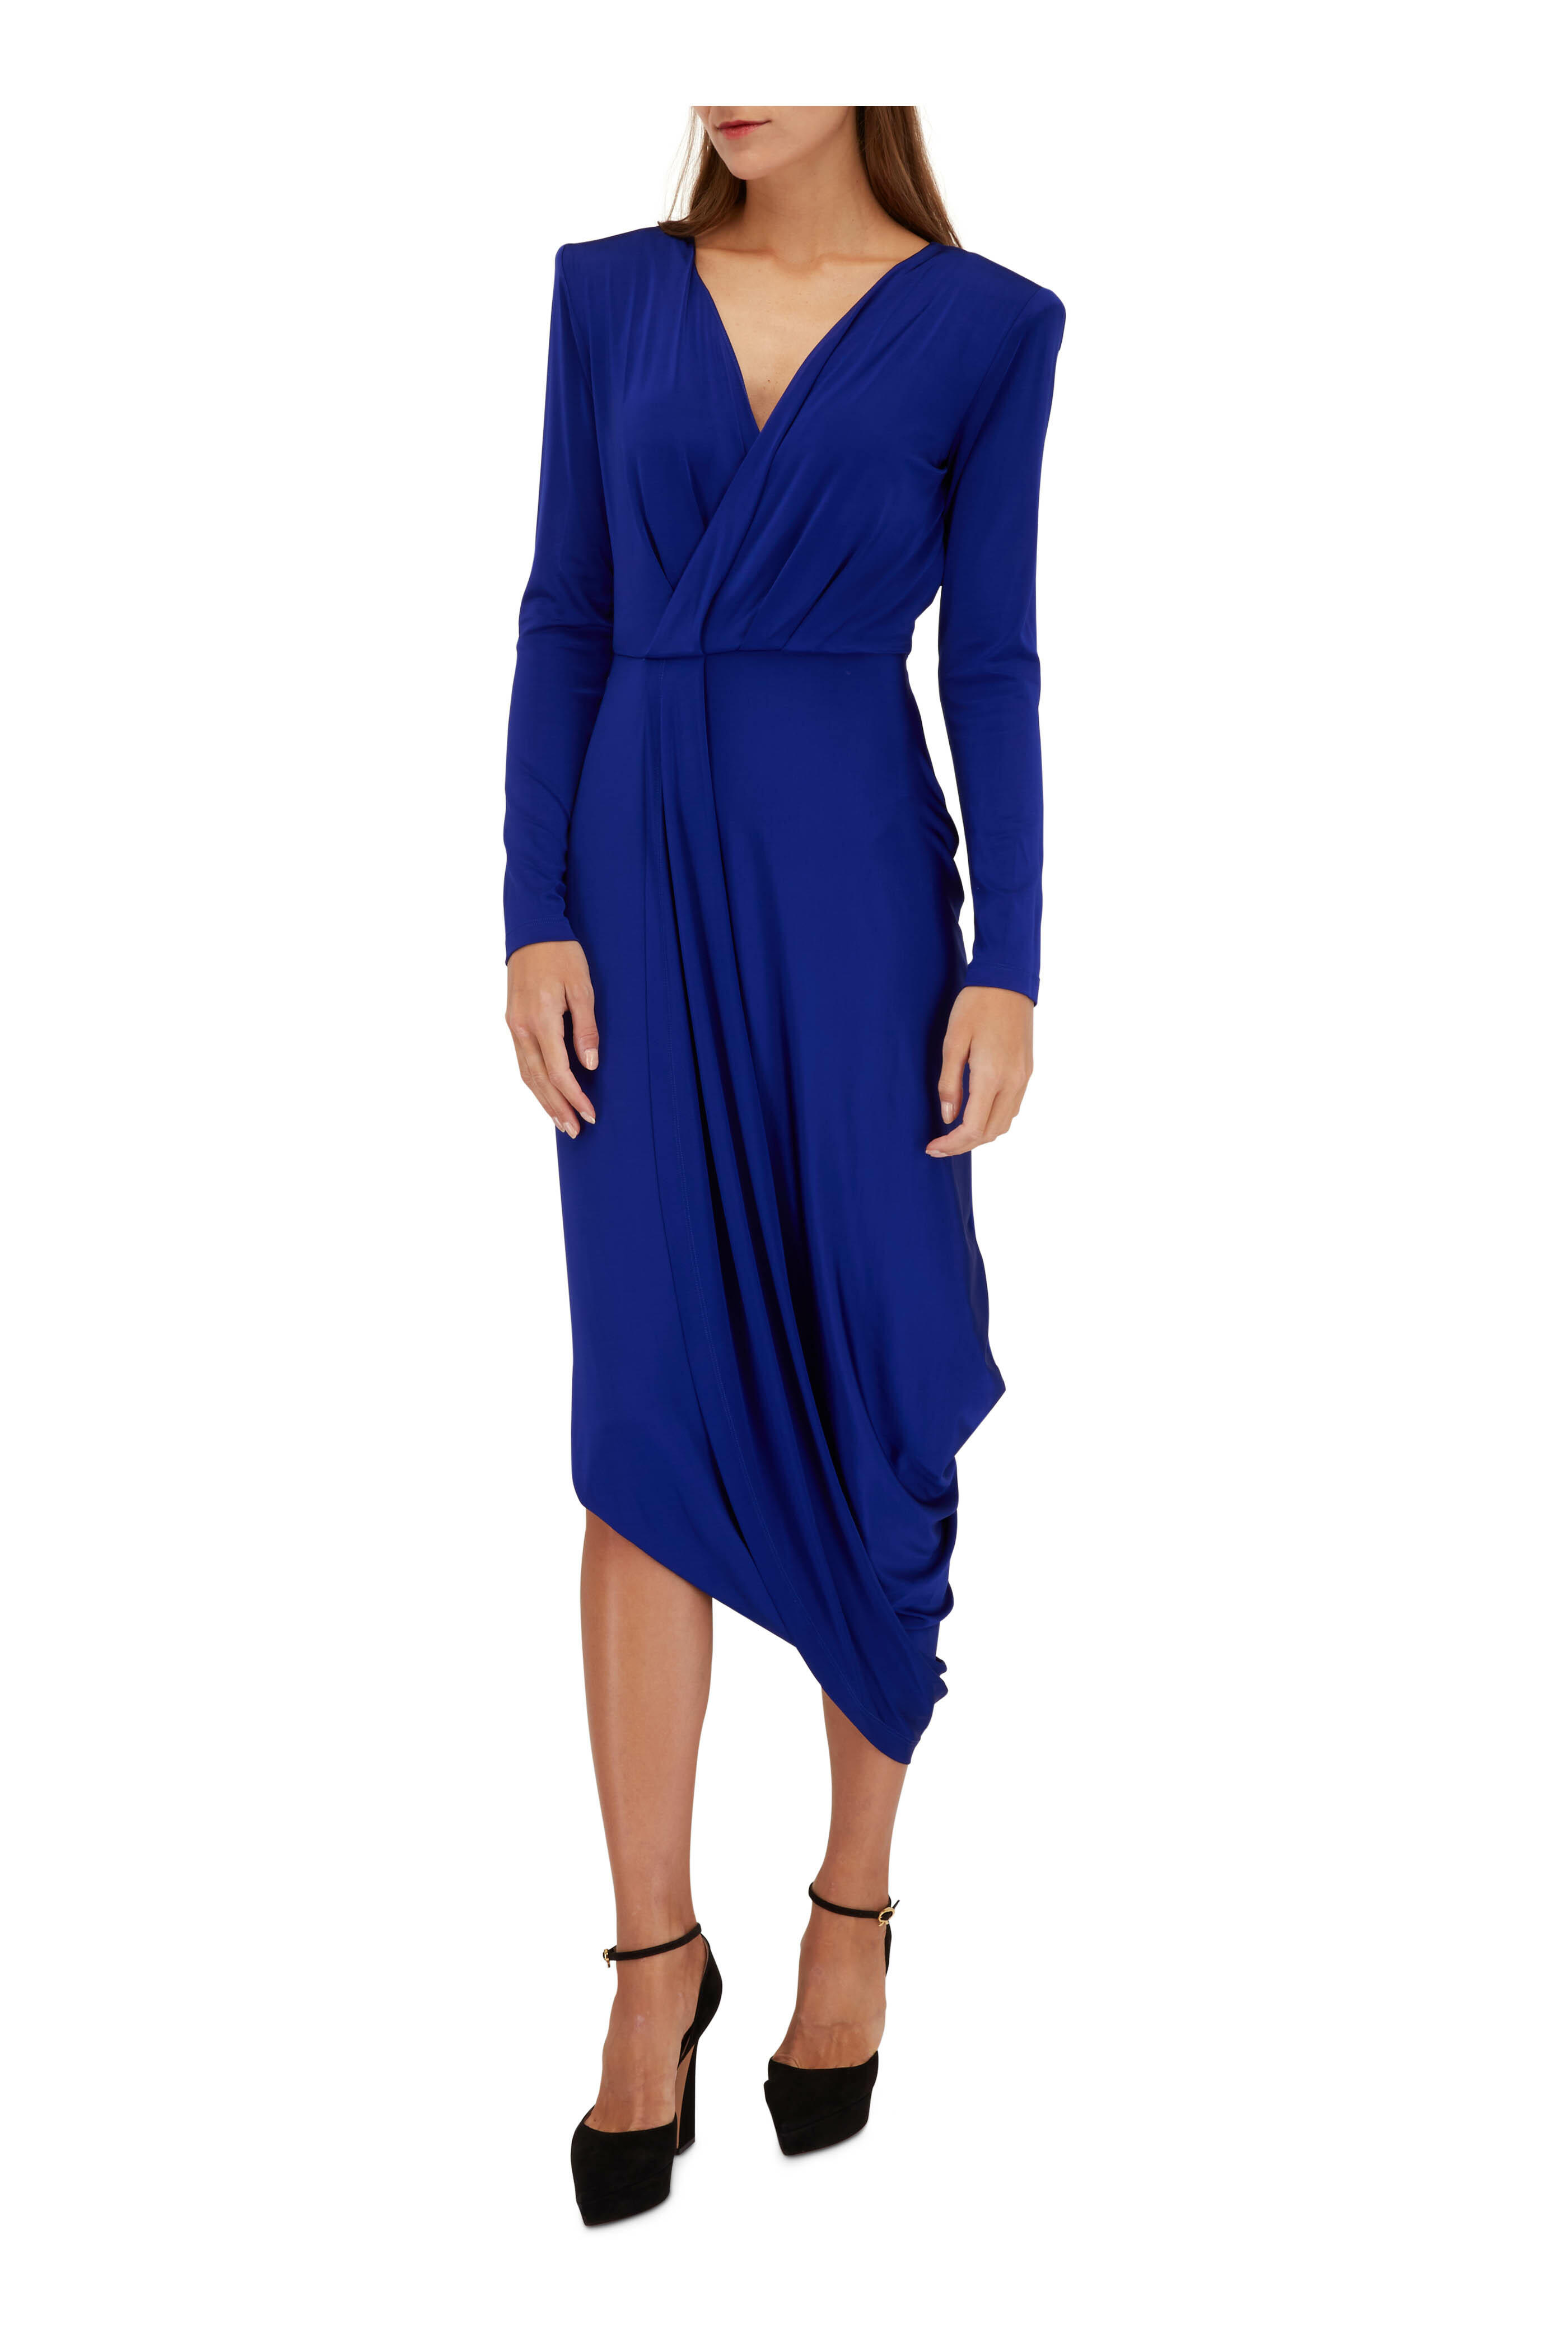 risiko Risikabel pedal Giorgio Armani - Cobalt Stretch Jersey Dress | Mitchell Stores